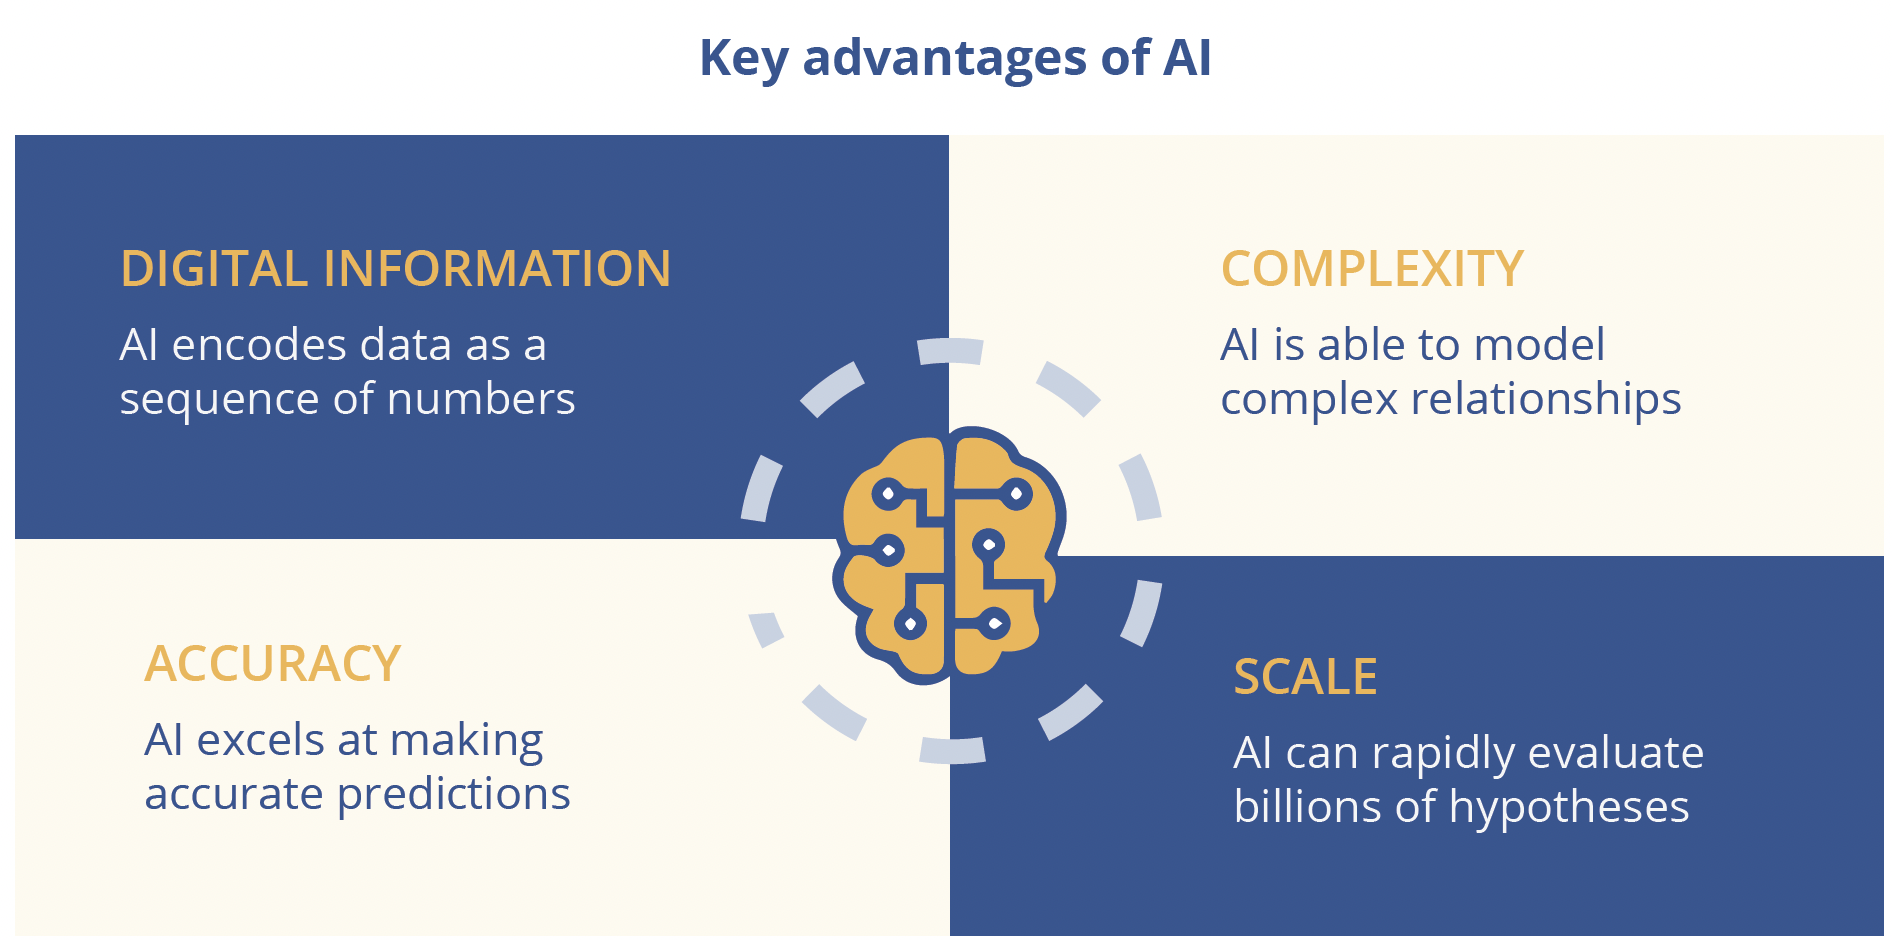 Key advantages of AI are its ability to process digital information (AI encodes data as a sequence of numbers)